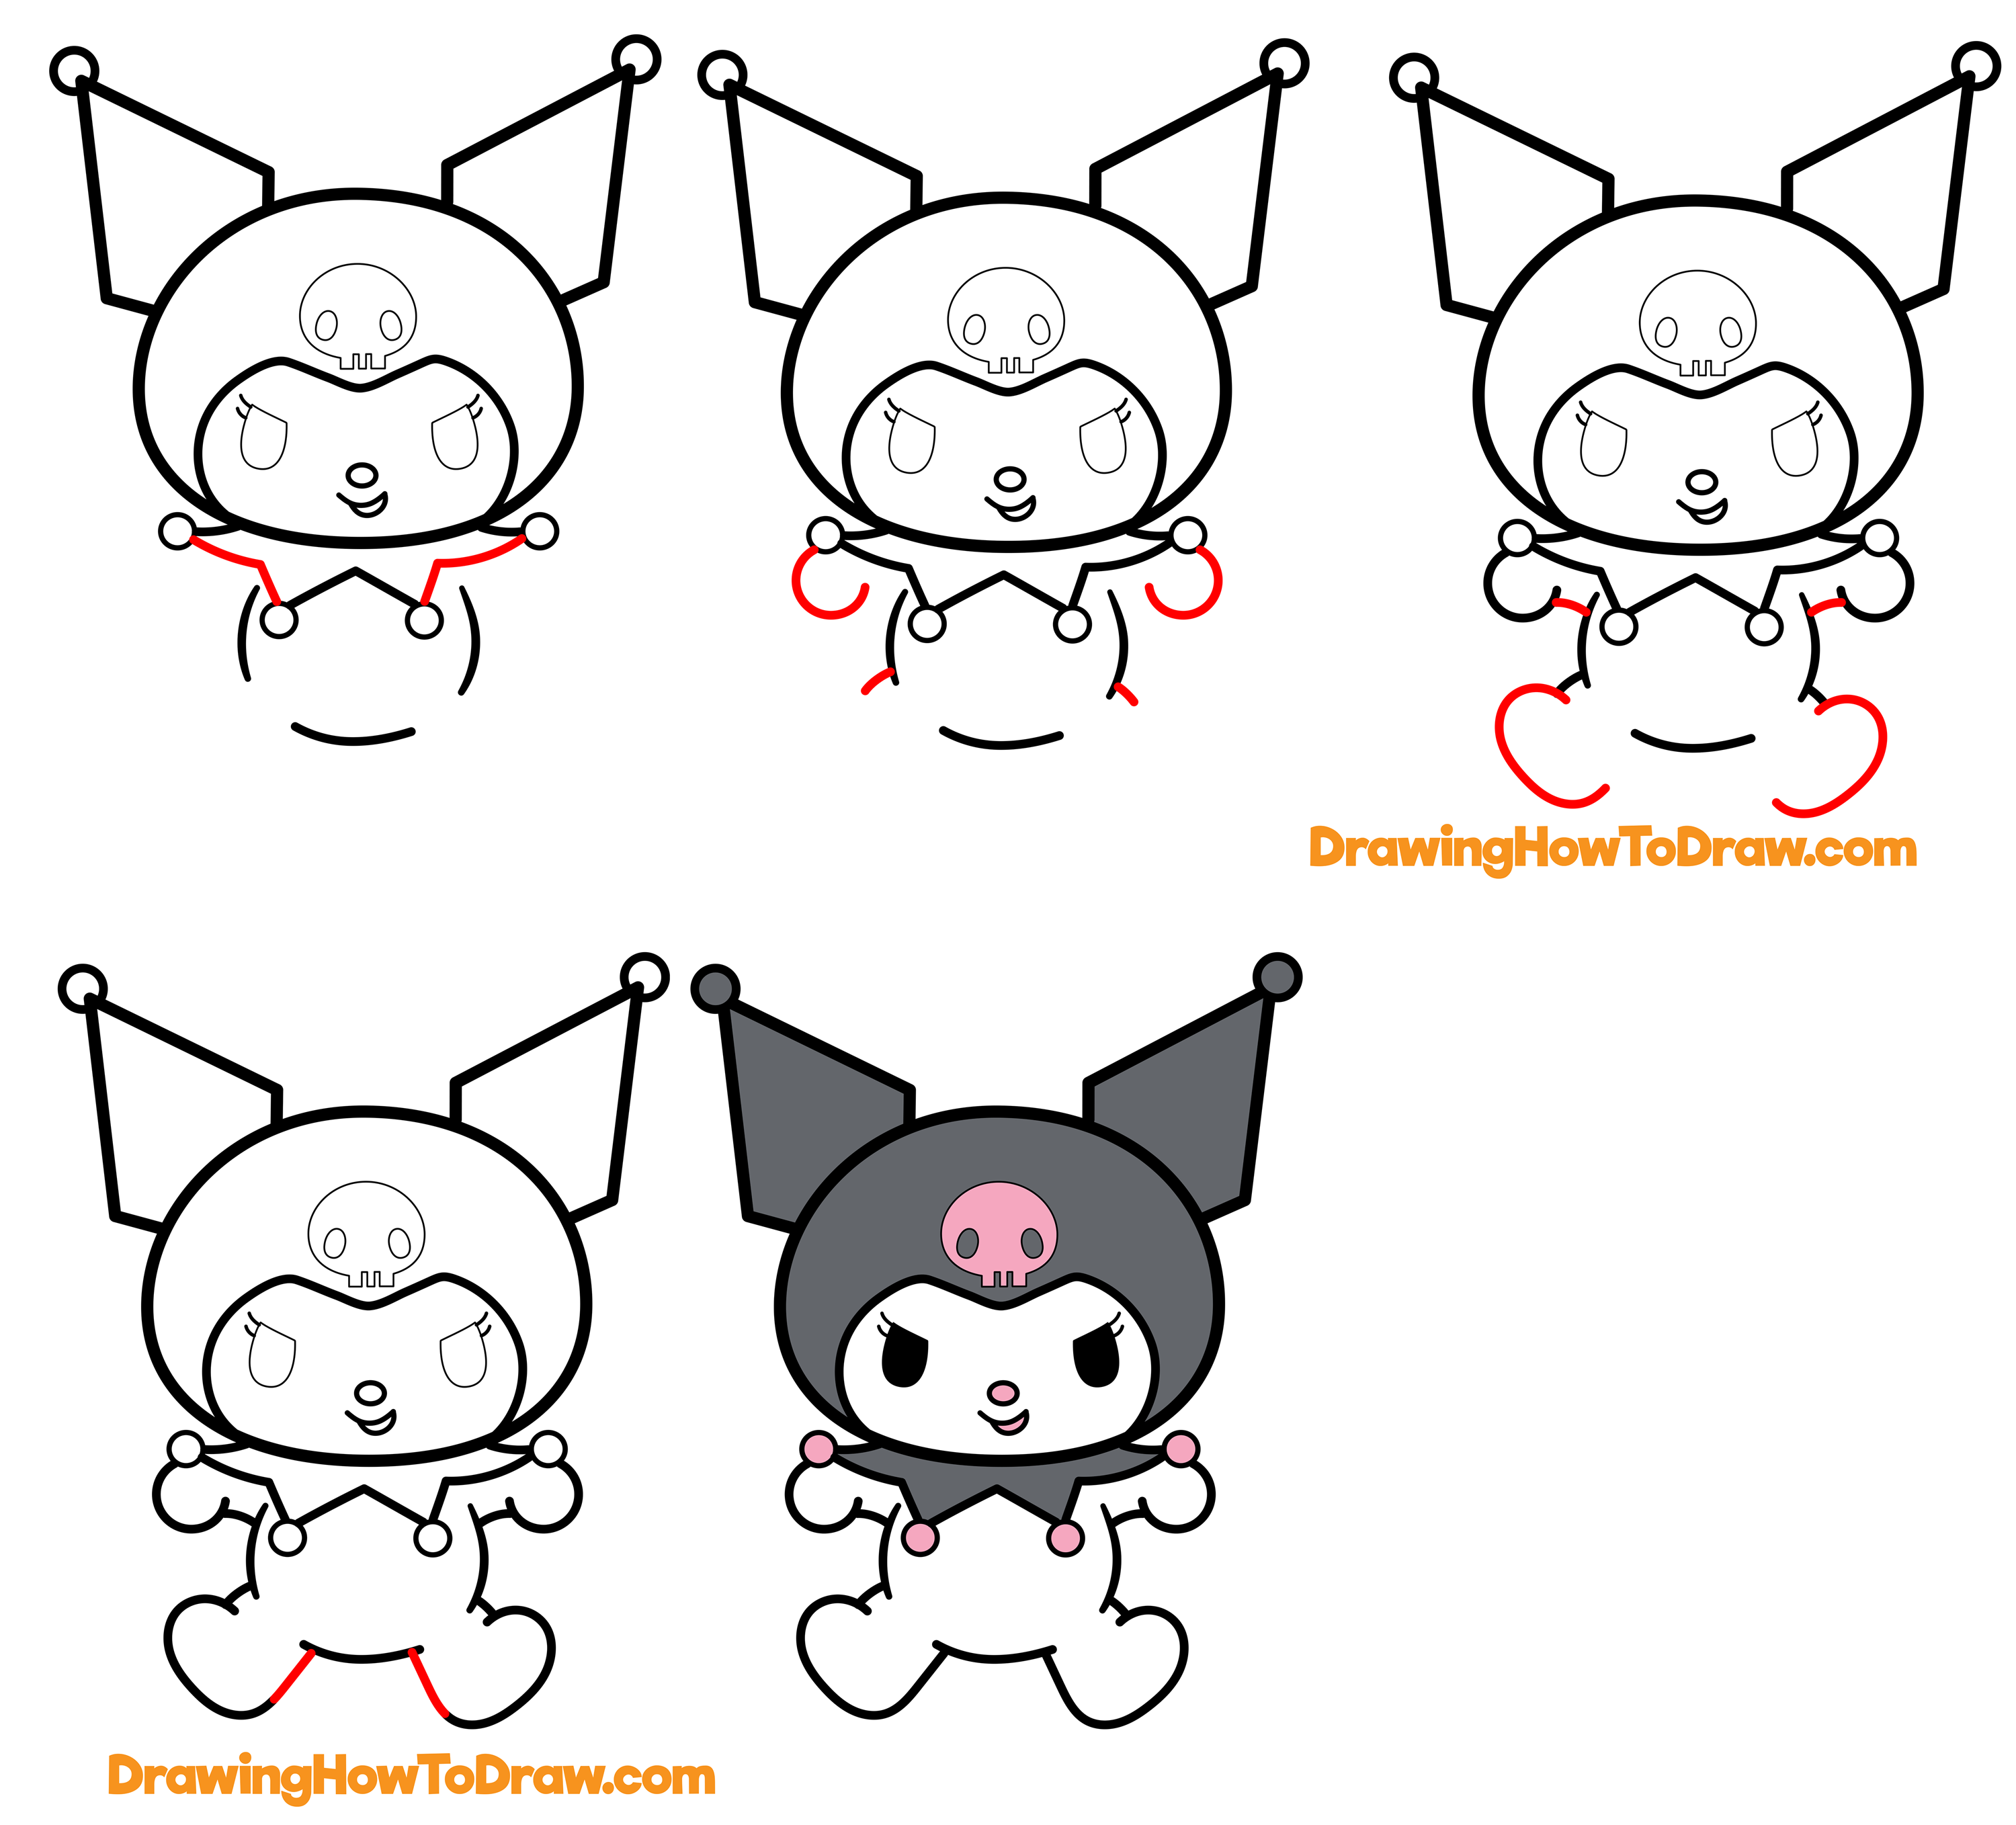 Hello Kitty Drawing Tutorial - How to draw Hello Kitty step by step